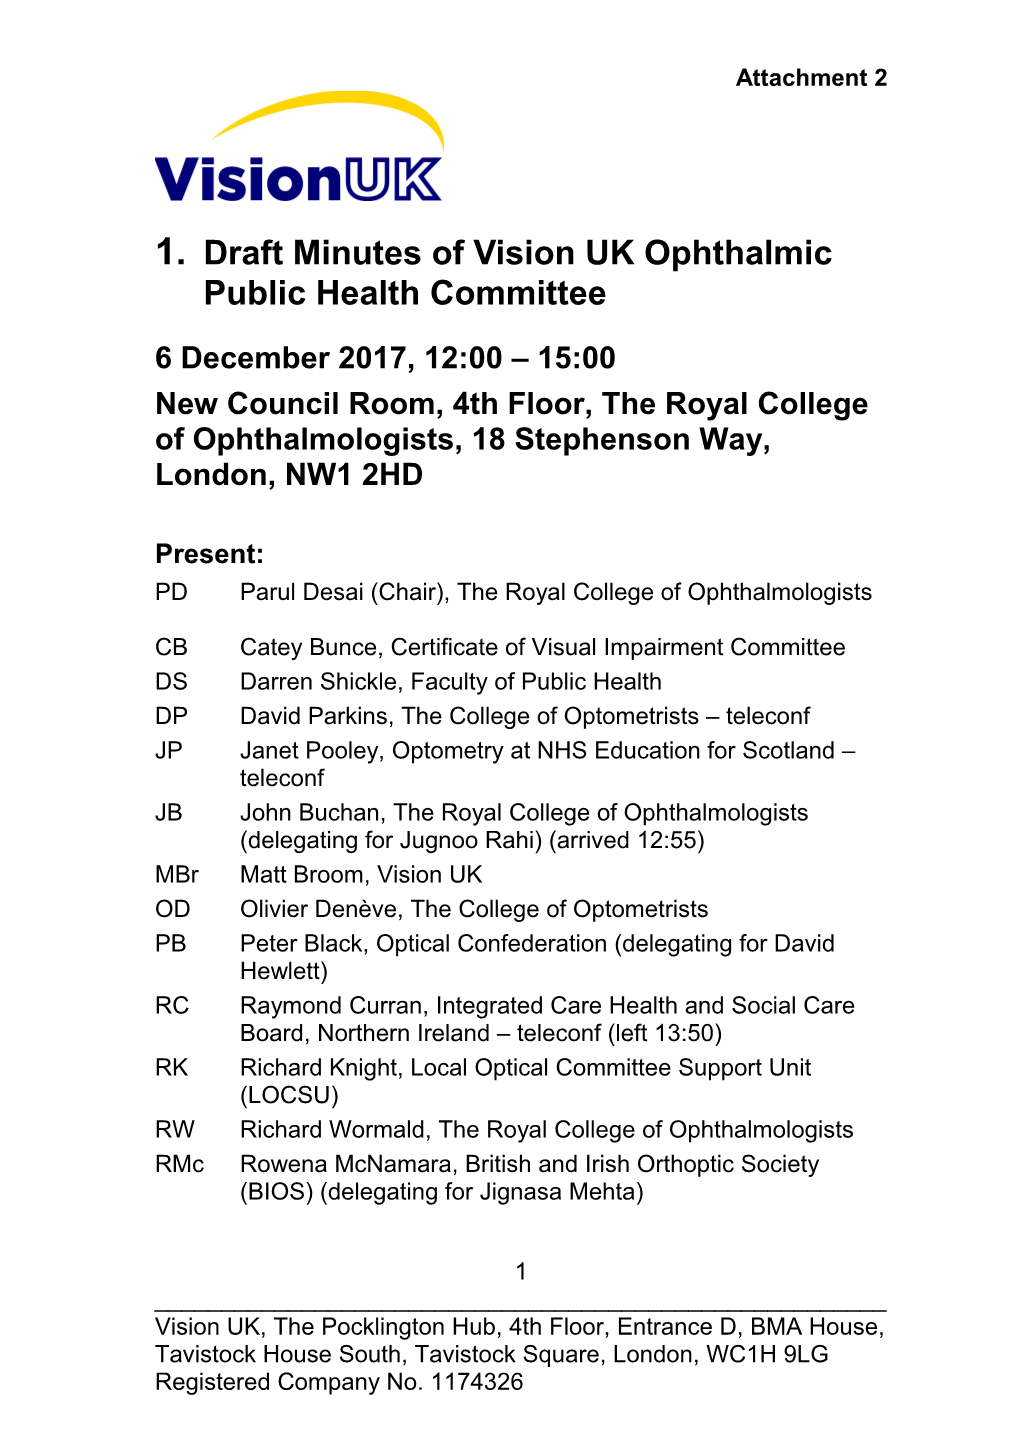 Draft Minutes of Vision UK Ophthalmic Public Health Committee